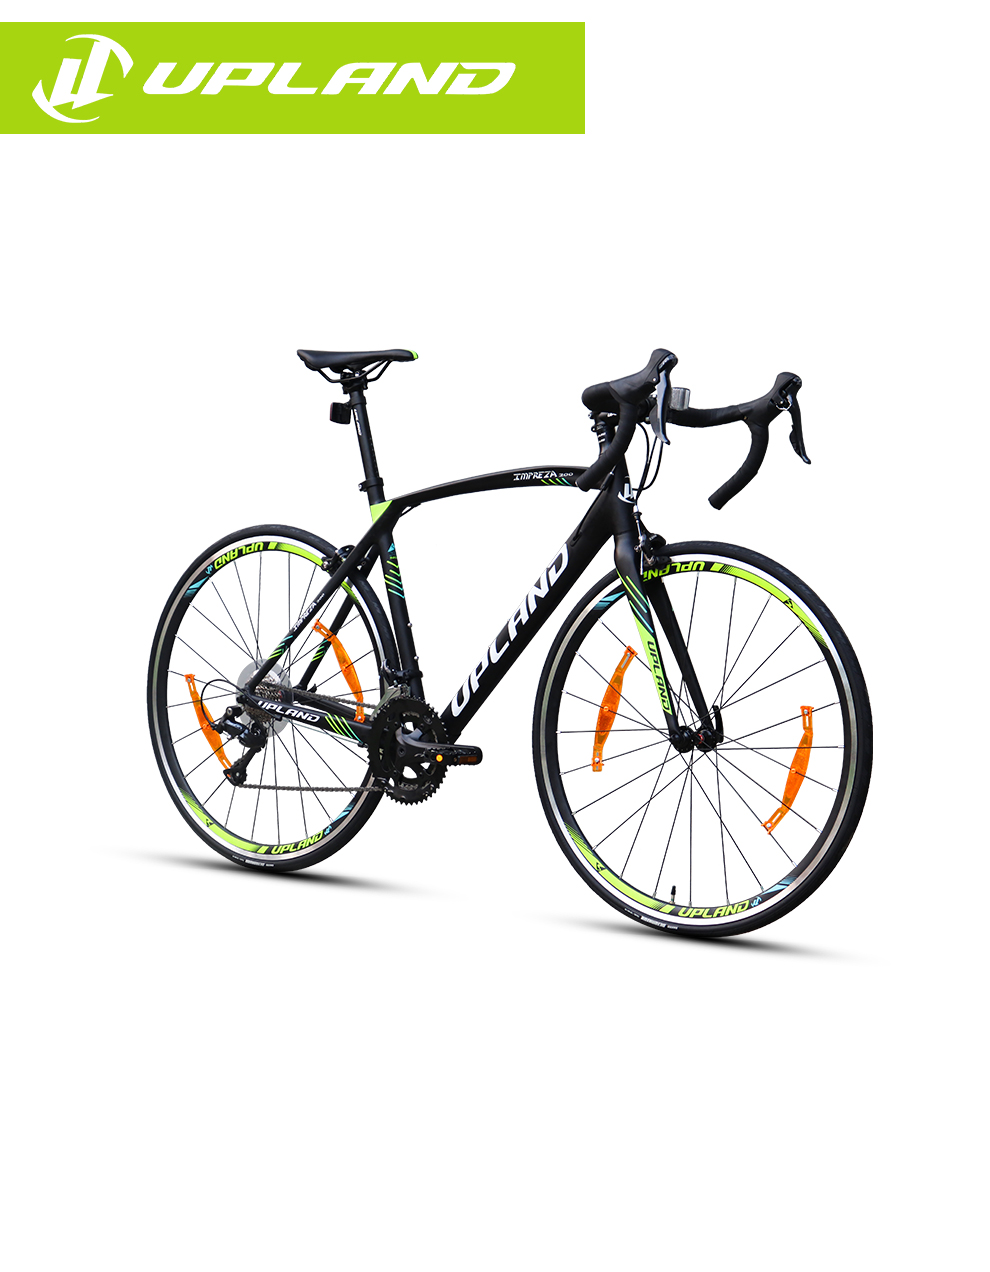 IMPREZA 200 M/S 700c Bike Shop Online Buy UPLAND Bike ROAD Cycle Bicycle Store in India.